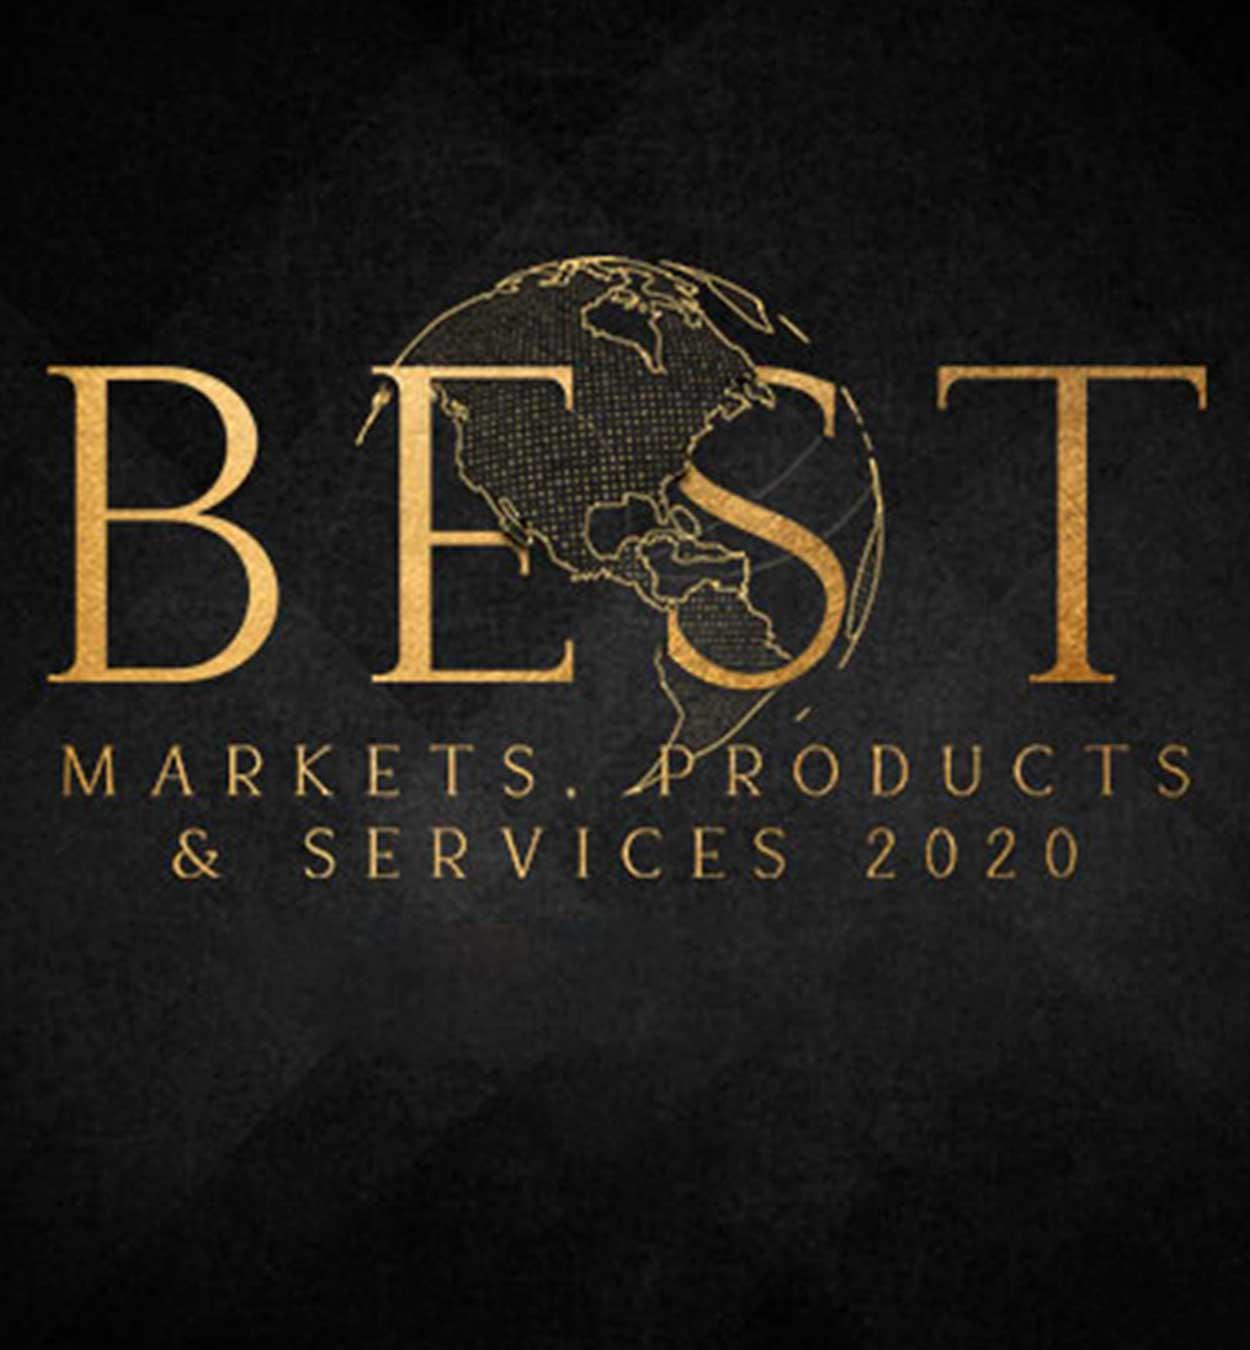 best markets, products & services